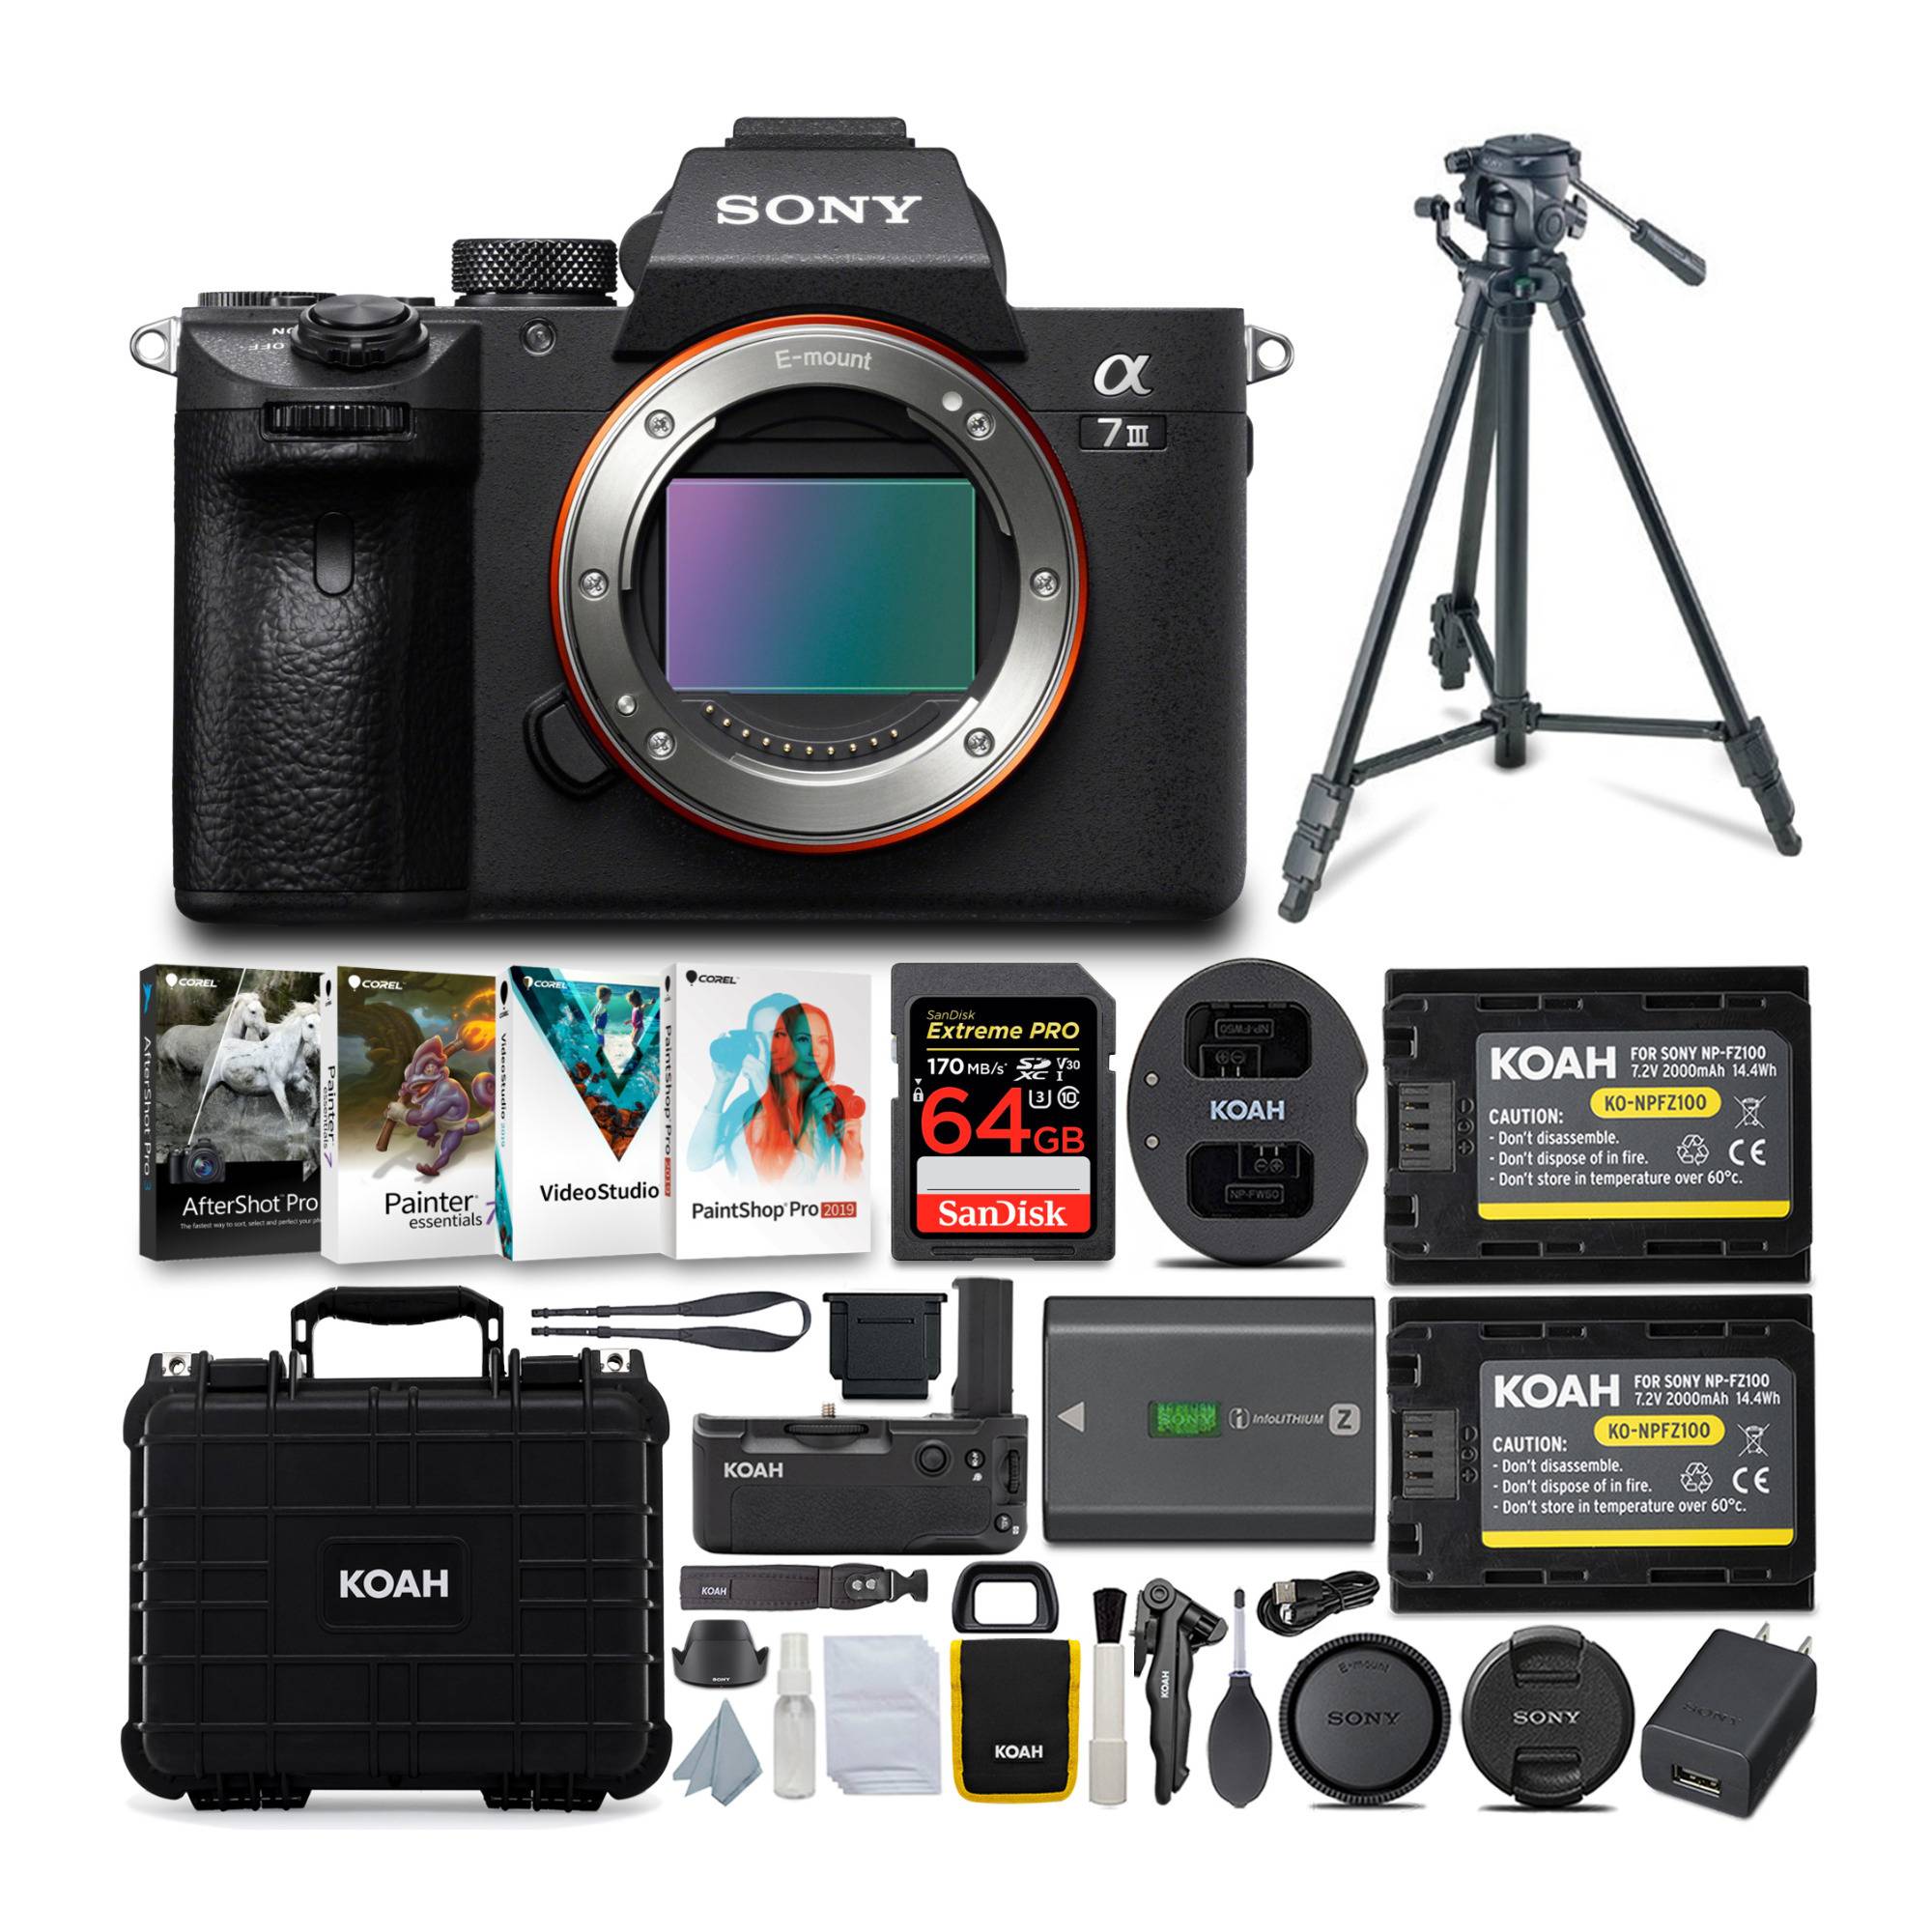 Sony Alpha a7 III 24.2MP Full-Frame Mirrorless Digital Camera (Body Only) with Accessory Bundle